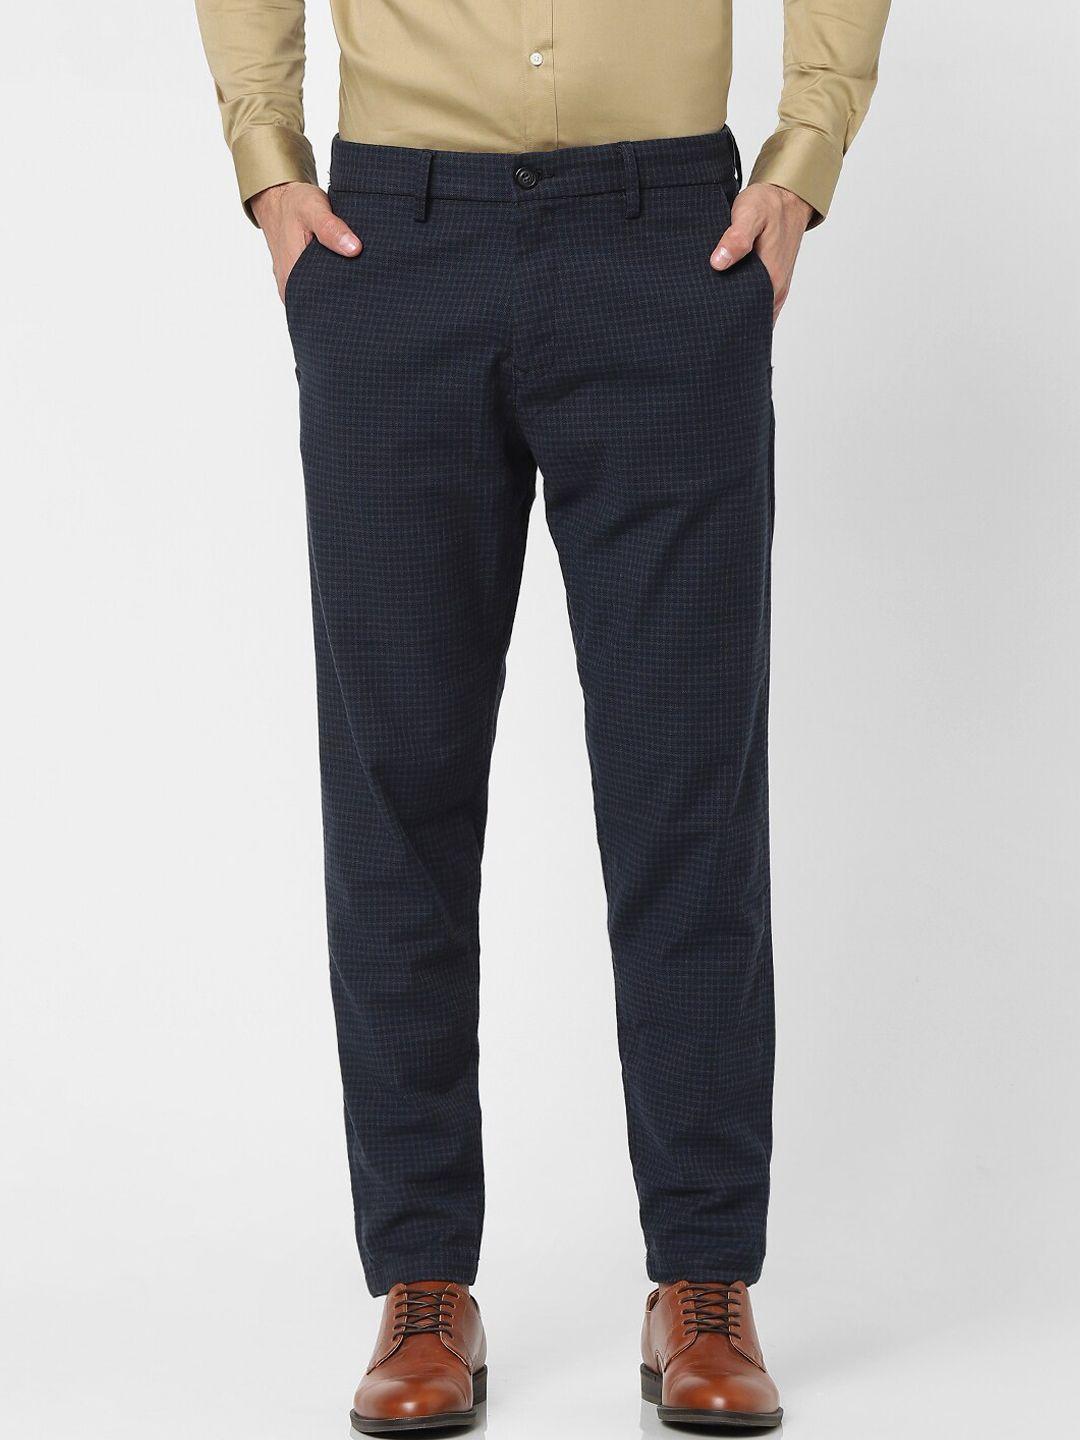 selected men navy blue checked slim fit trousers